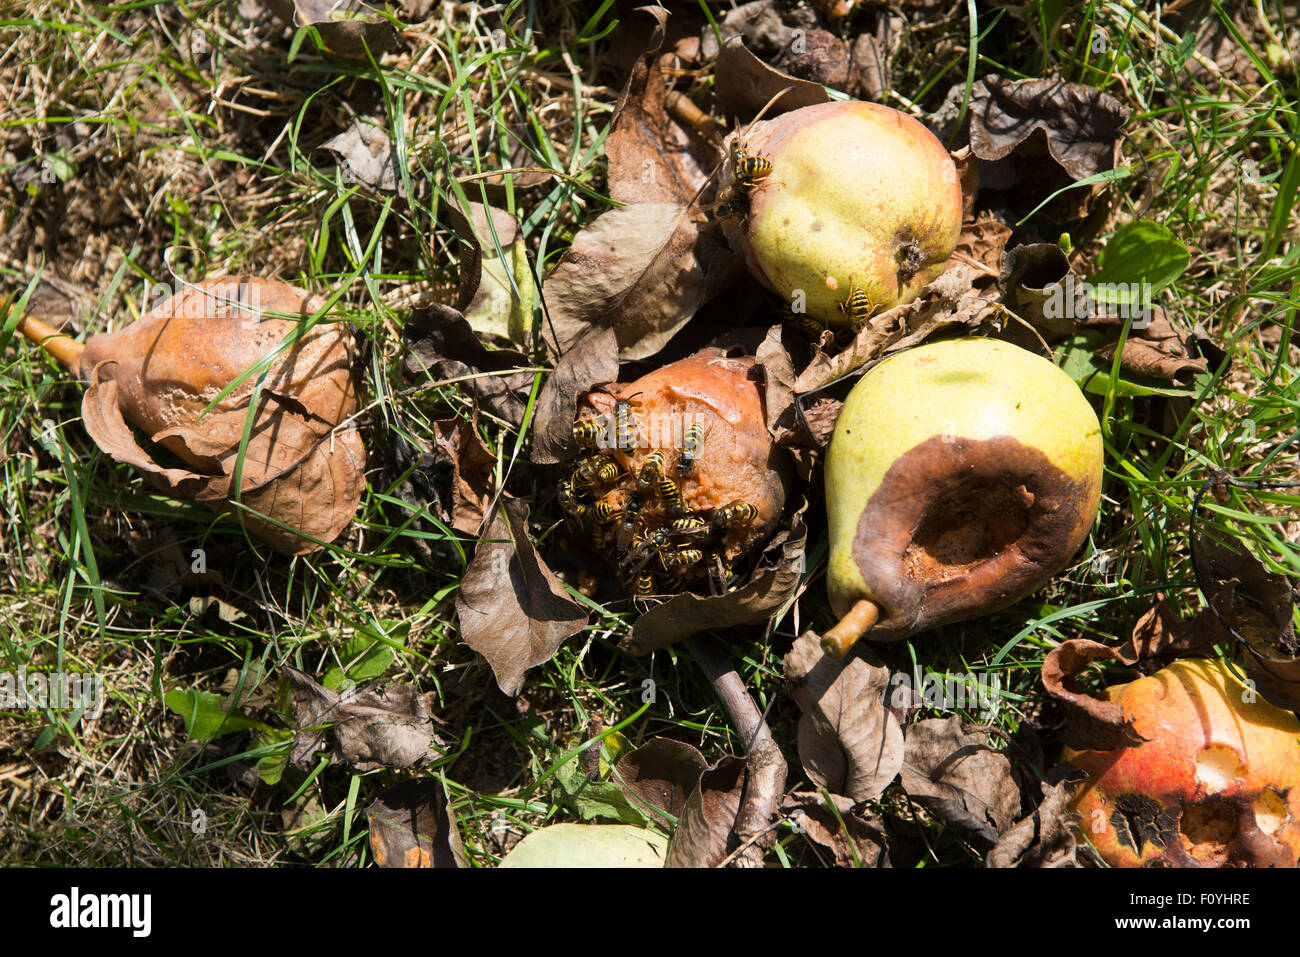 Wasps feeding on a fallen pears and apples in an Orchard Stock Photo